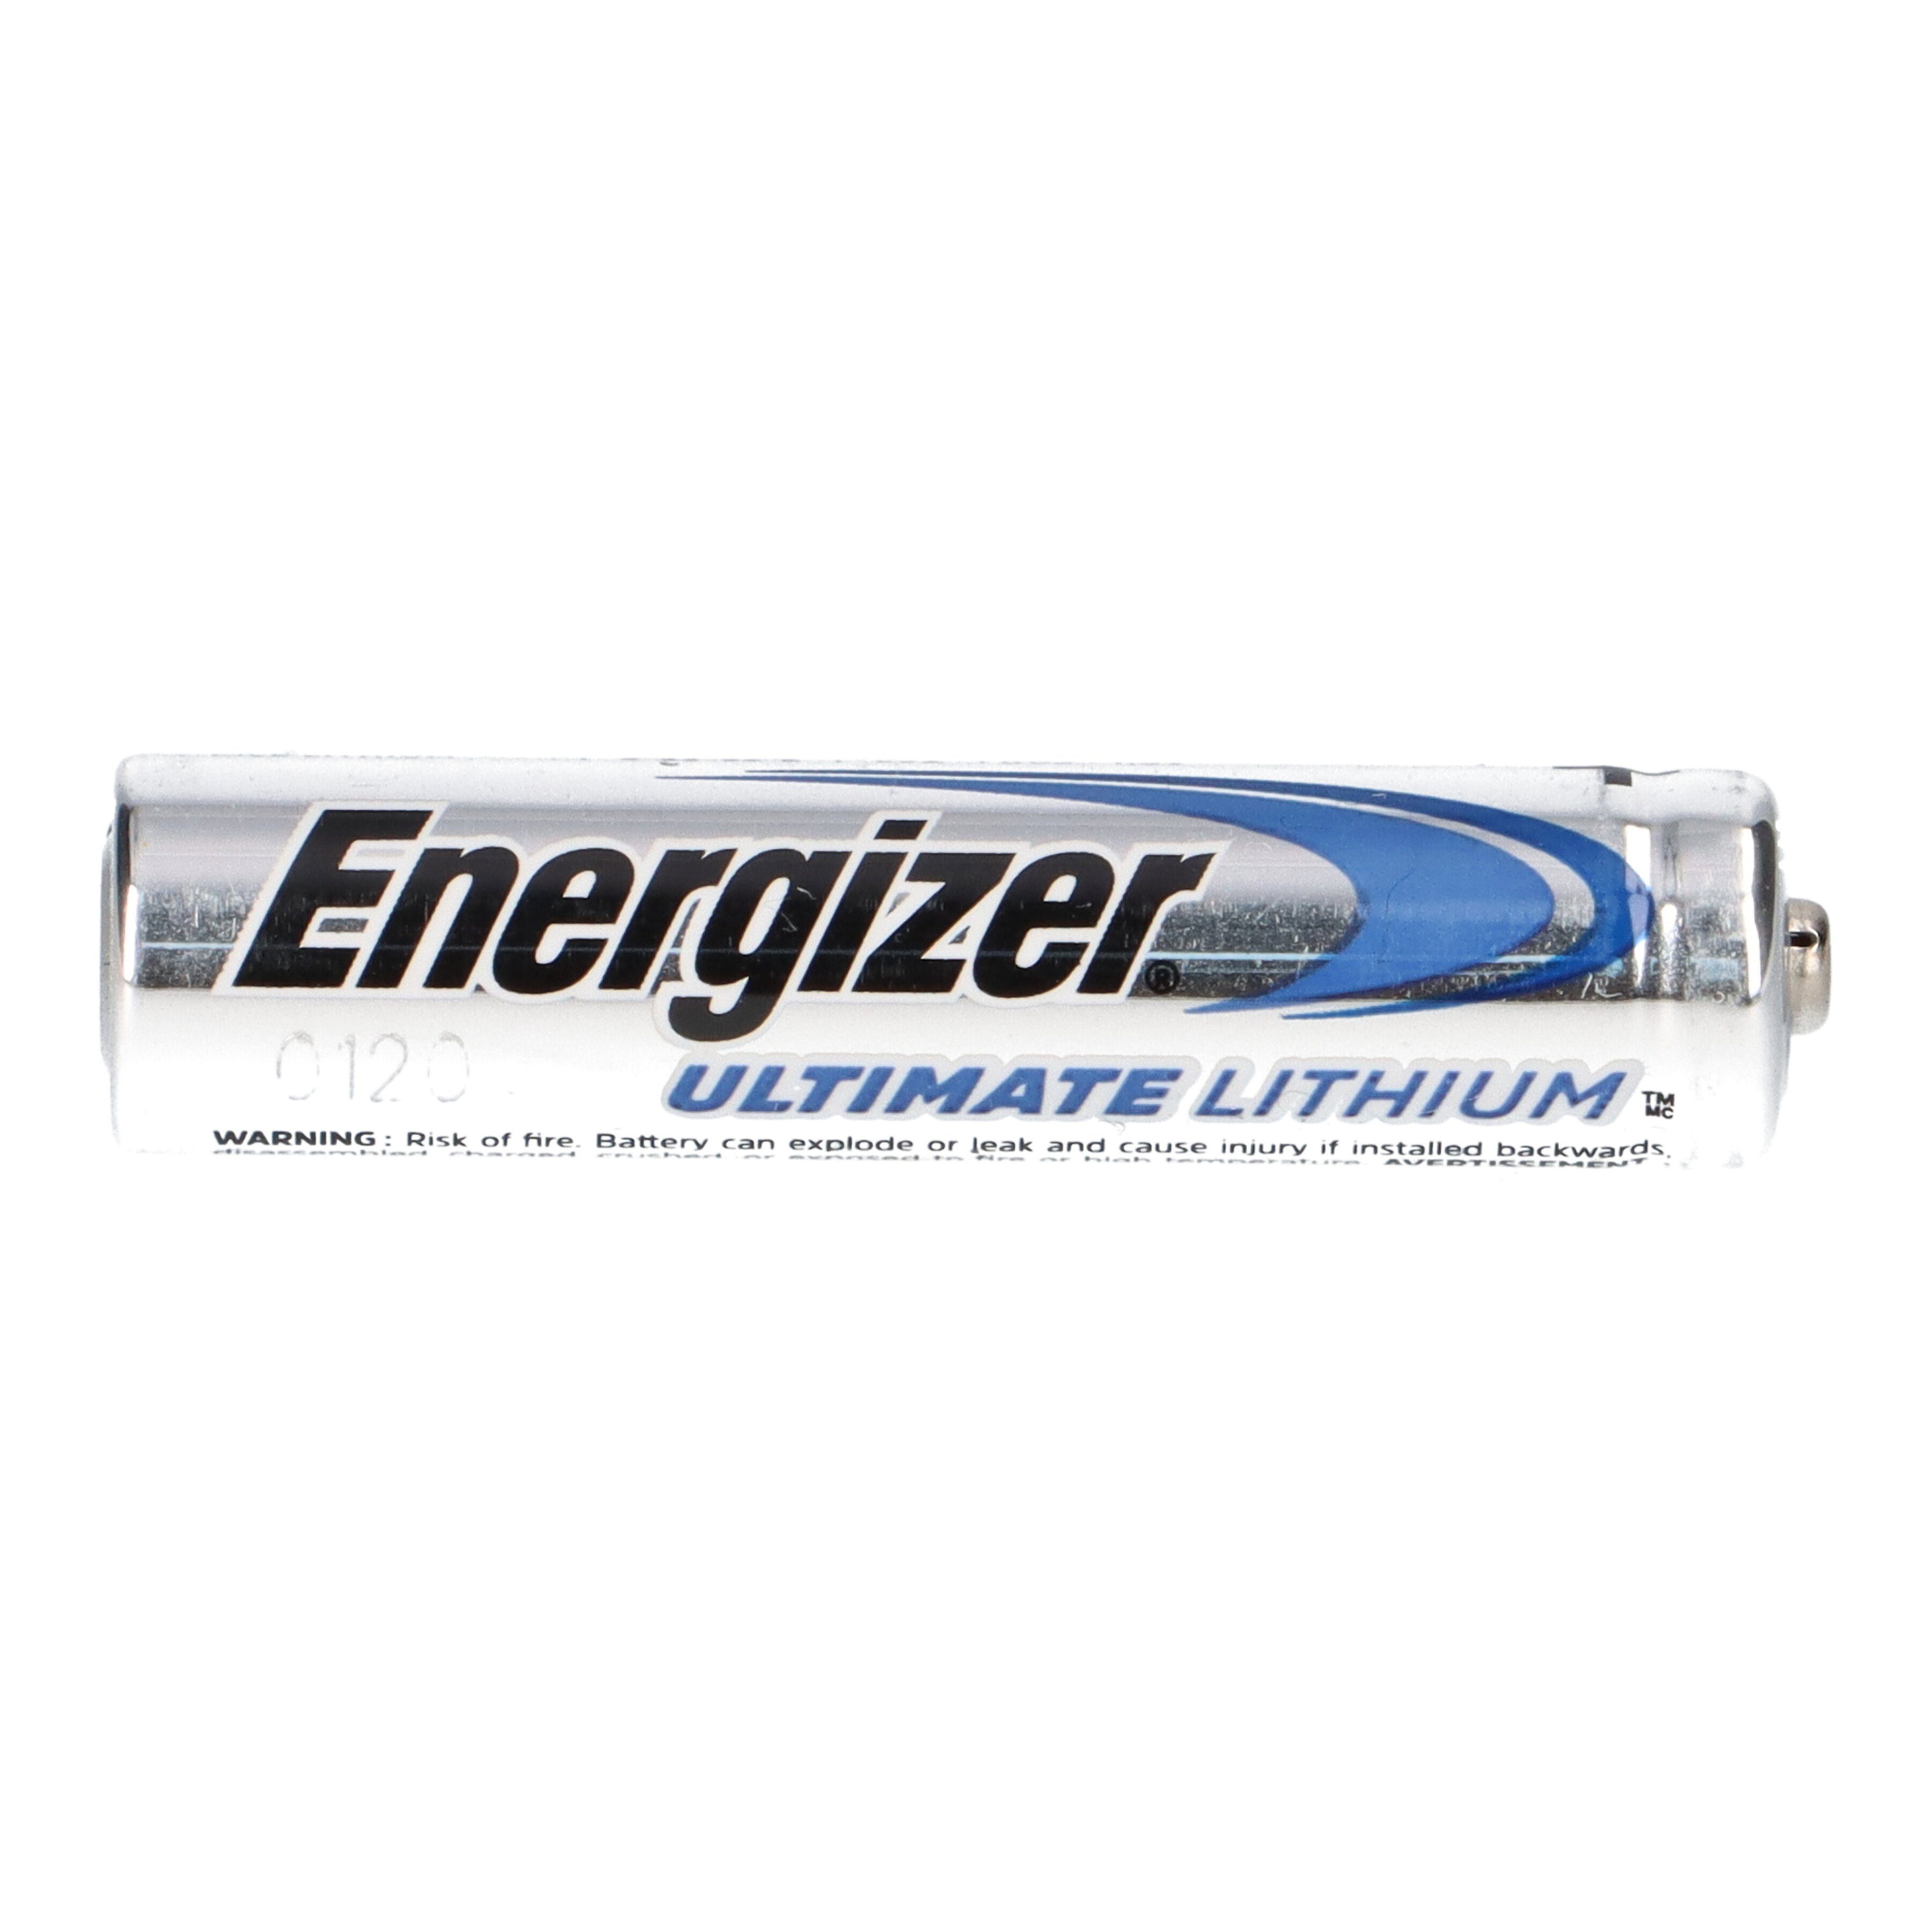 LR03 Batterie Energizer Lithium Batterie Ultimate Micro L92 120x AAA Energizer 1.5V